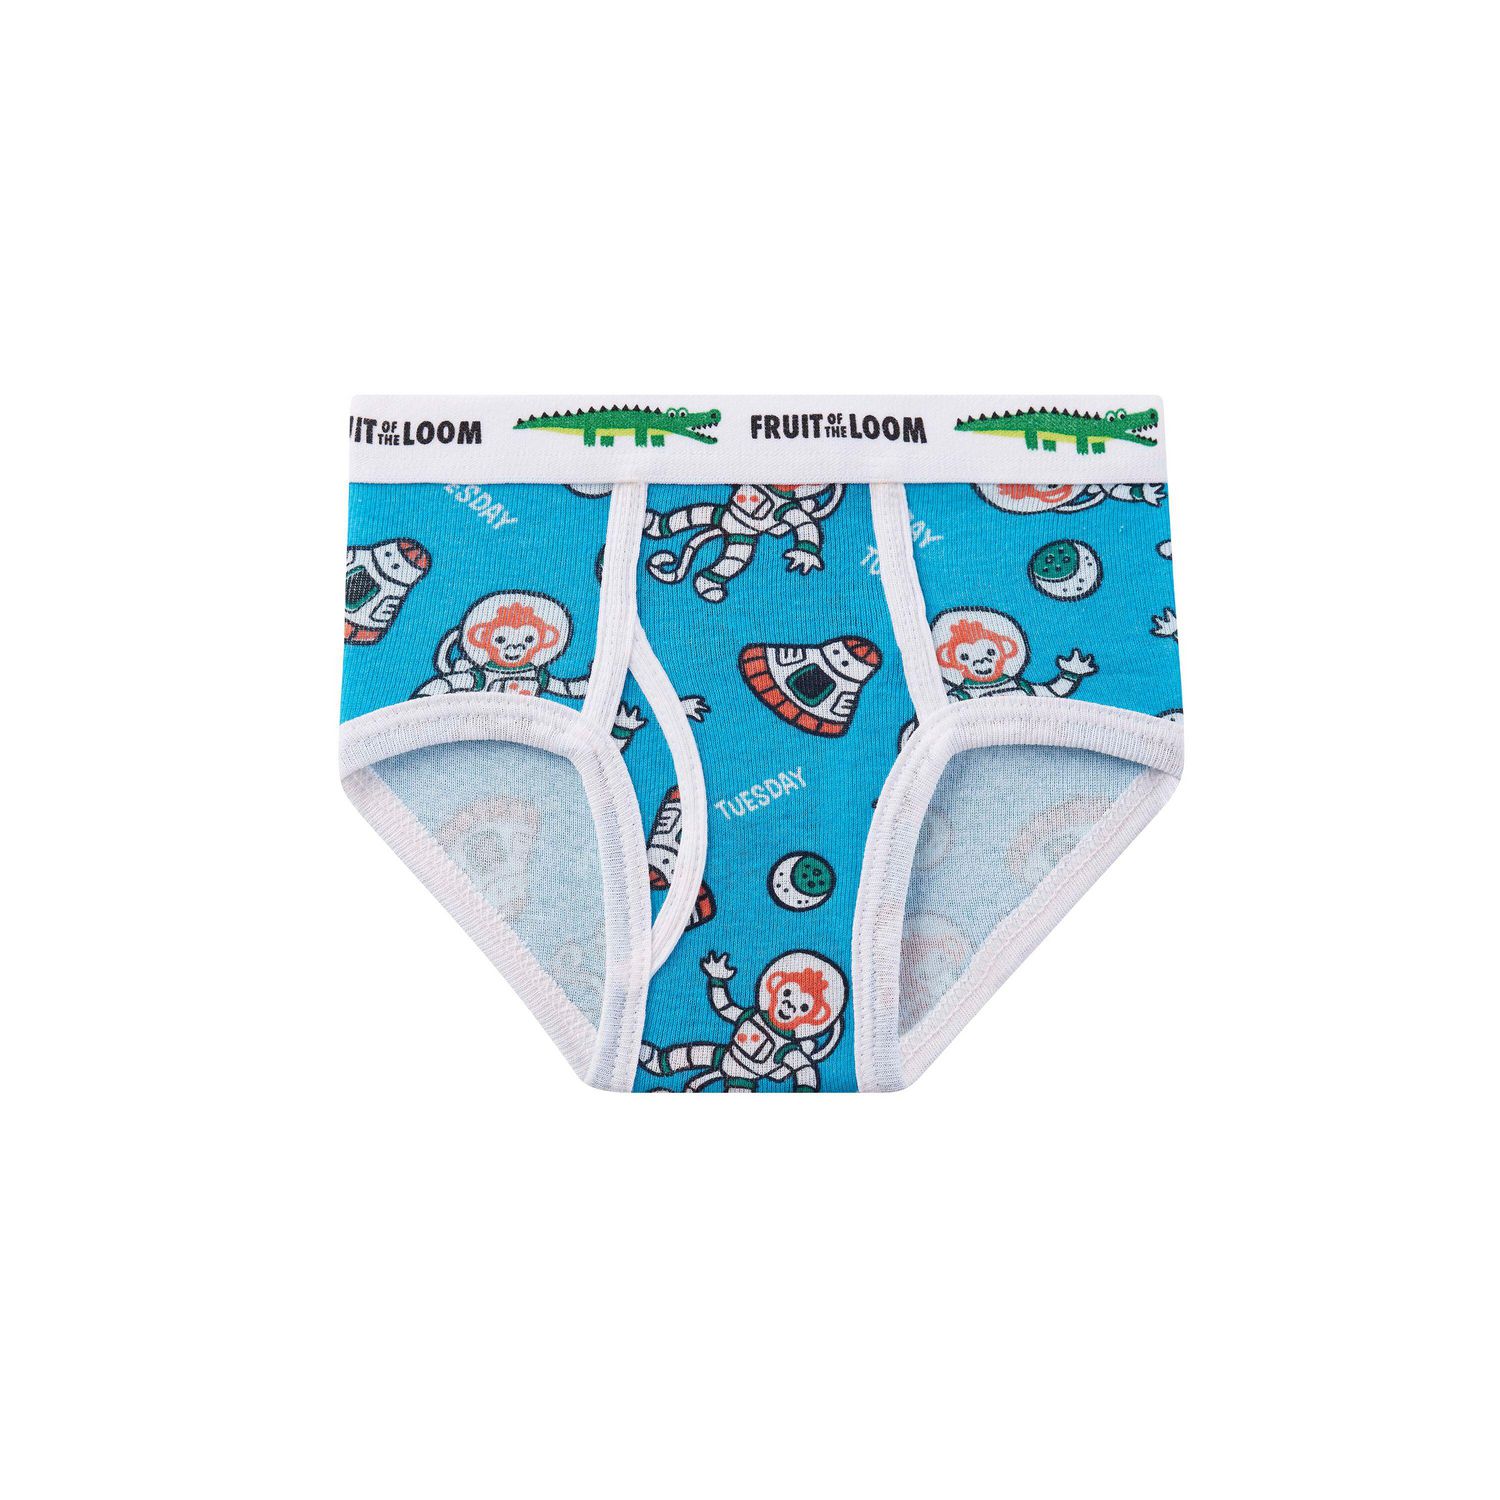 Fruit of the Loom Toddler Girl Brief Underwear, 6 Pack, Sizes 2T-5T 